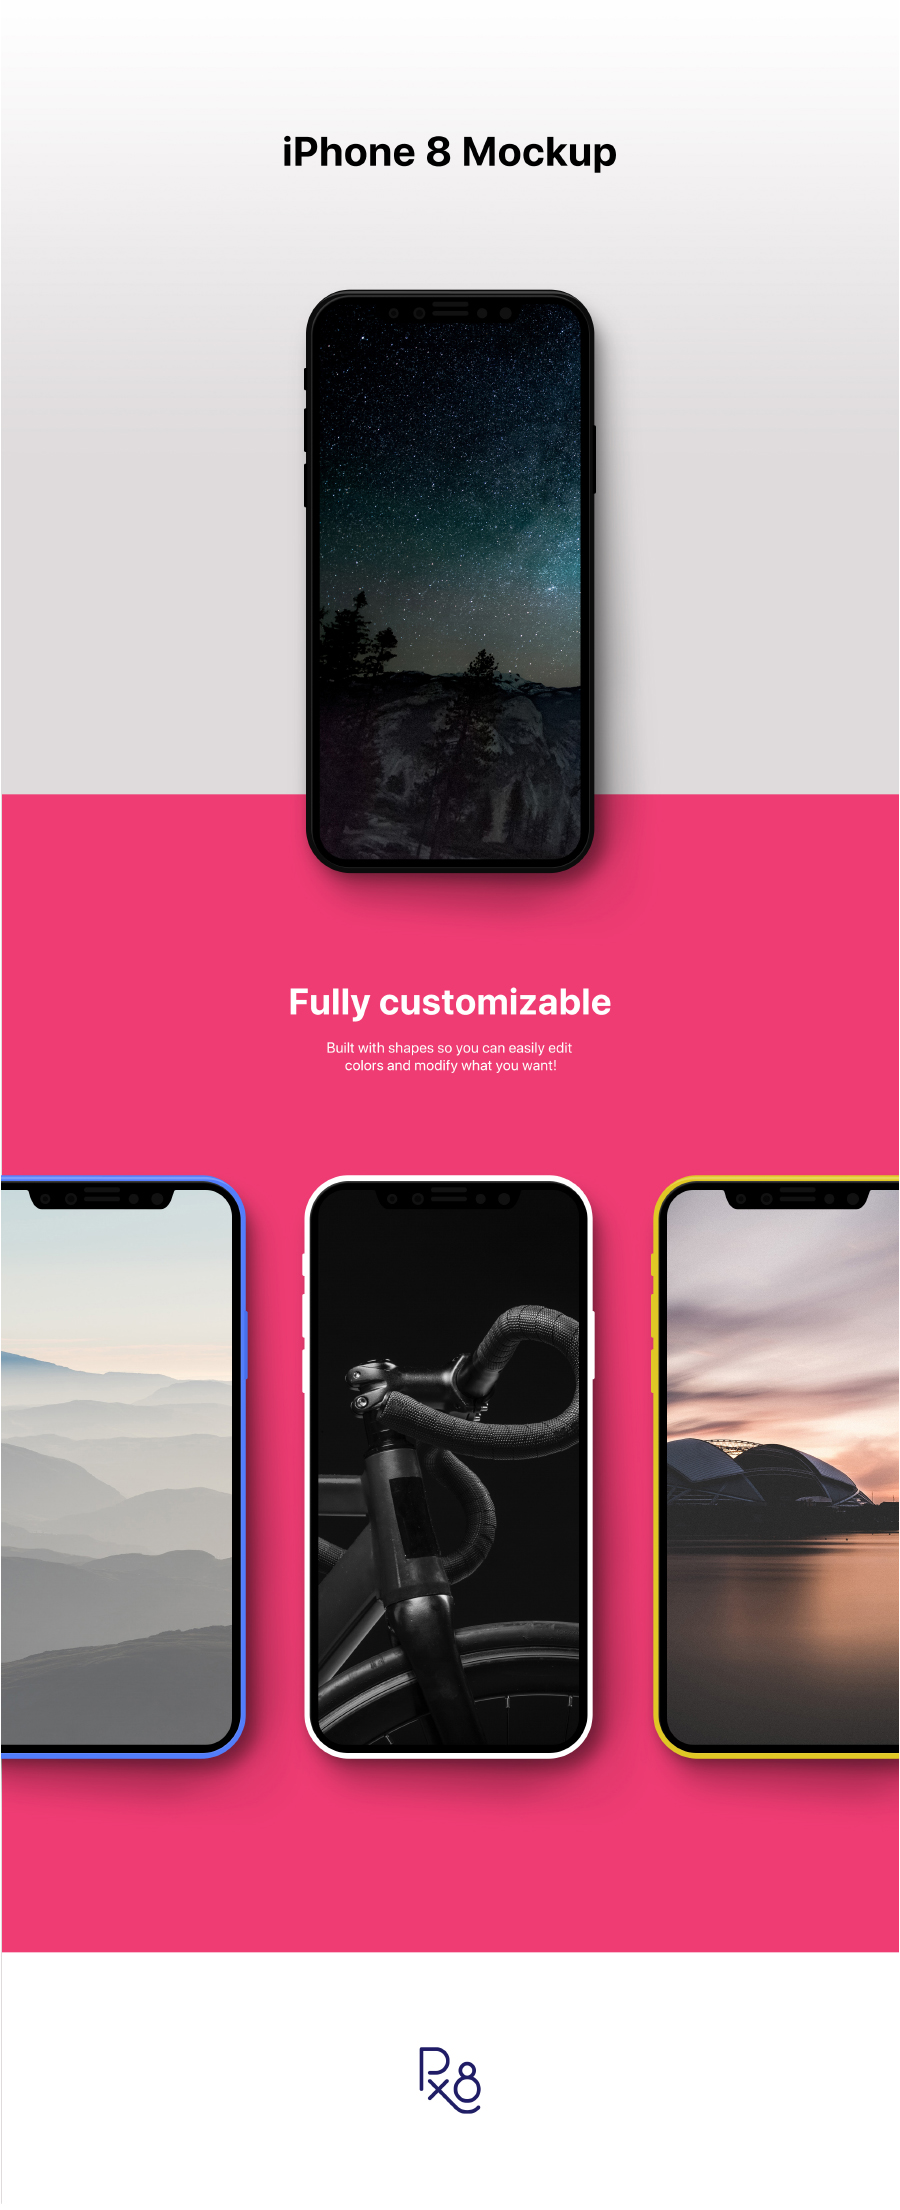 Download iPhone 8 Mockup Free PSD - Engine Templates